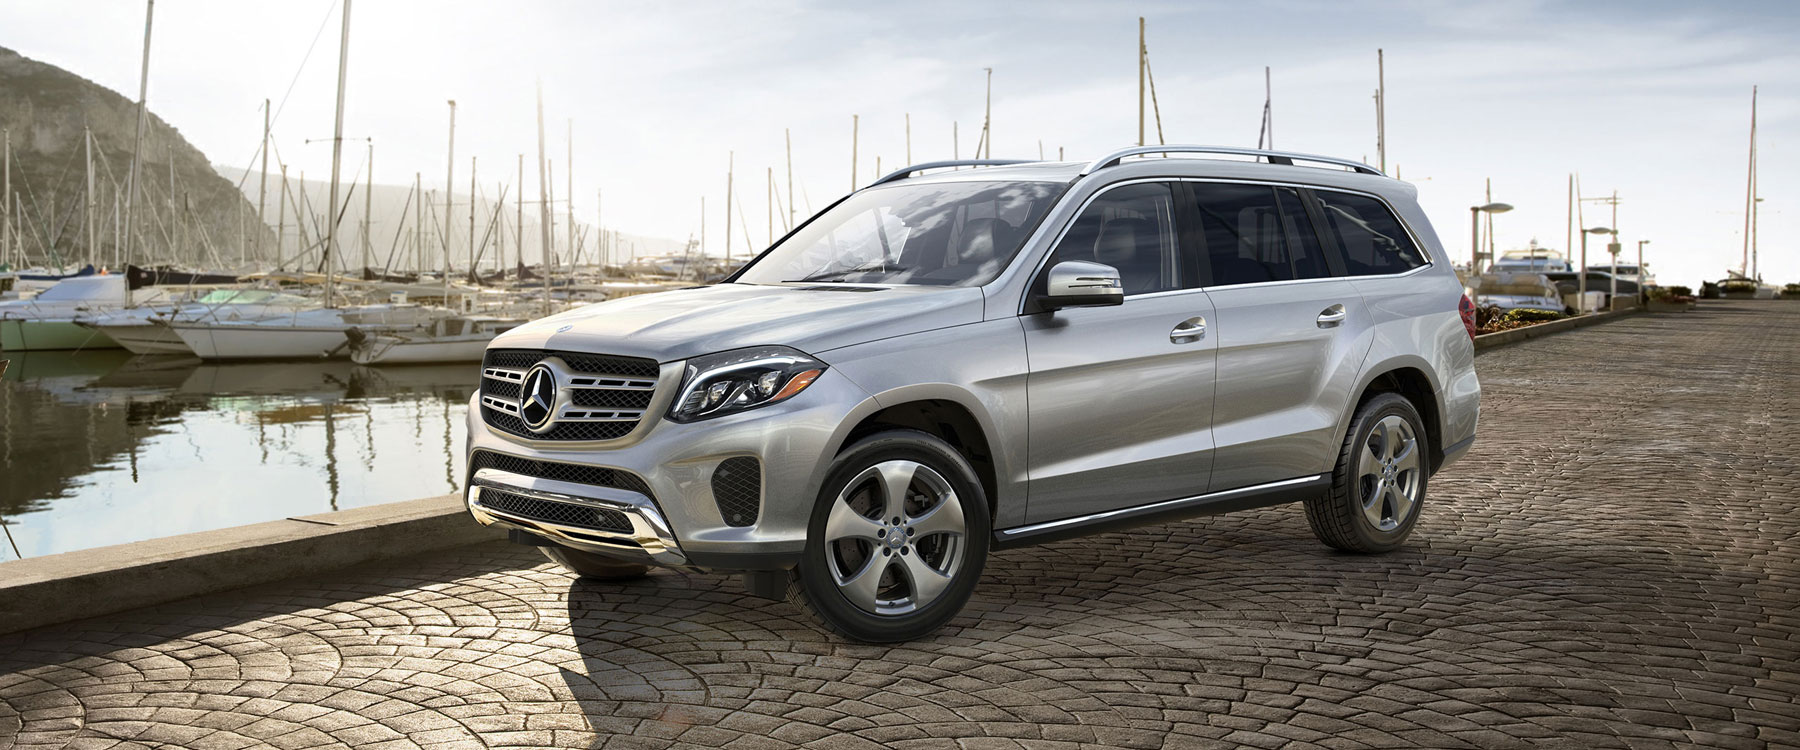 2019 GLS 450 4MATIC® SUV Specs & Features | Mercedes-Benz of Chicago